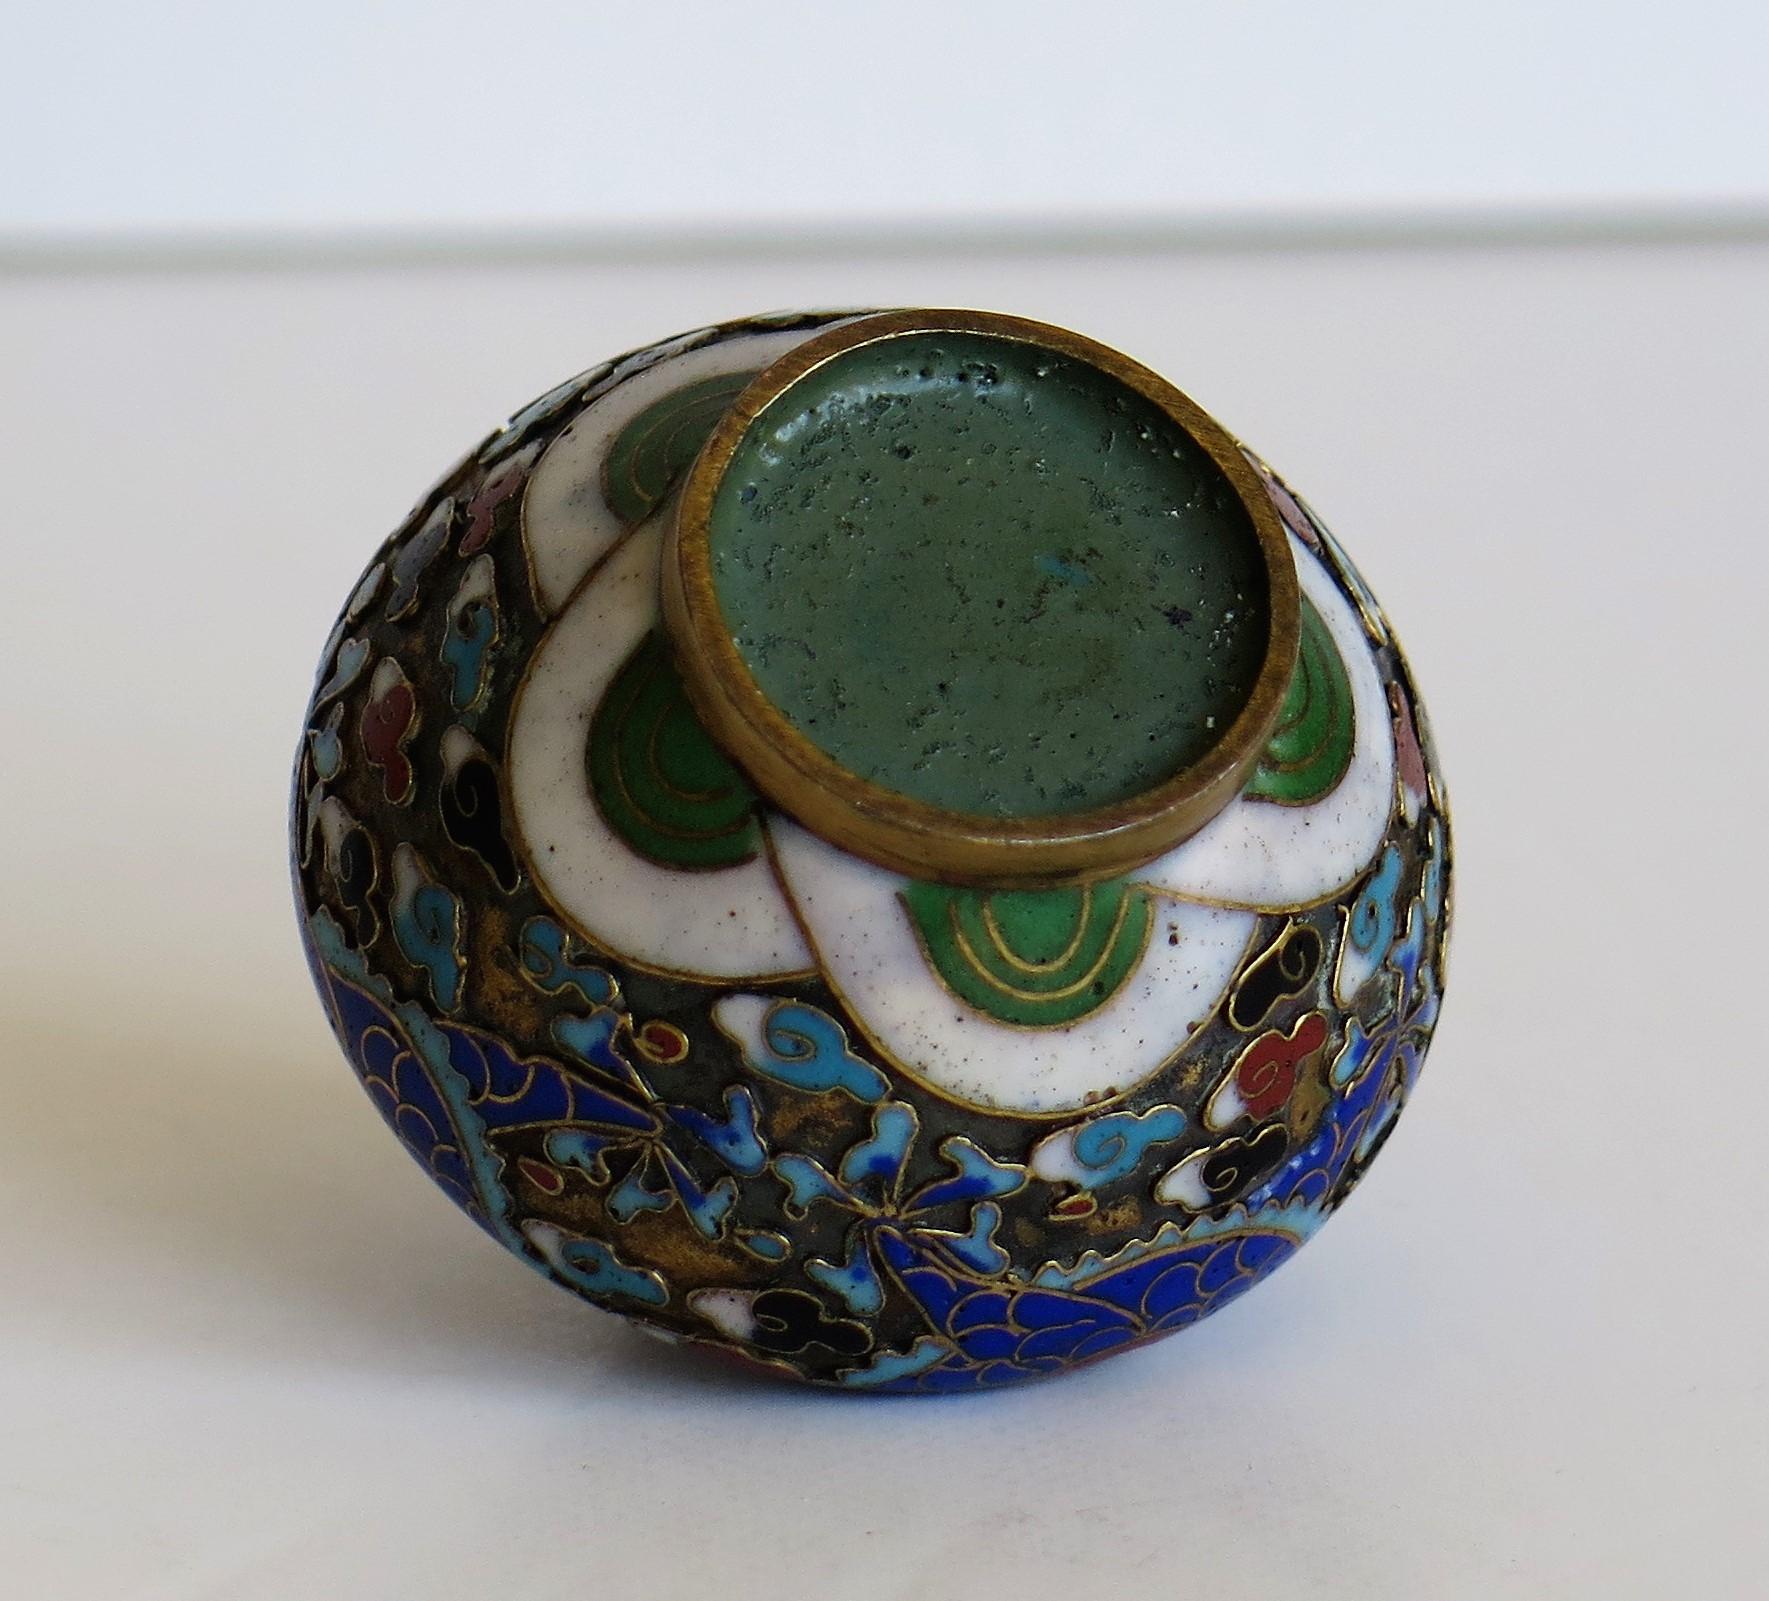 19th Century Chinese Cloisonné Pepper Pot with Dragon Decoration, Qing Dynasty 12